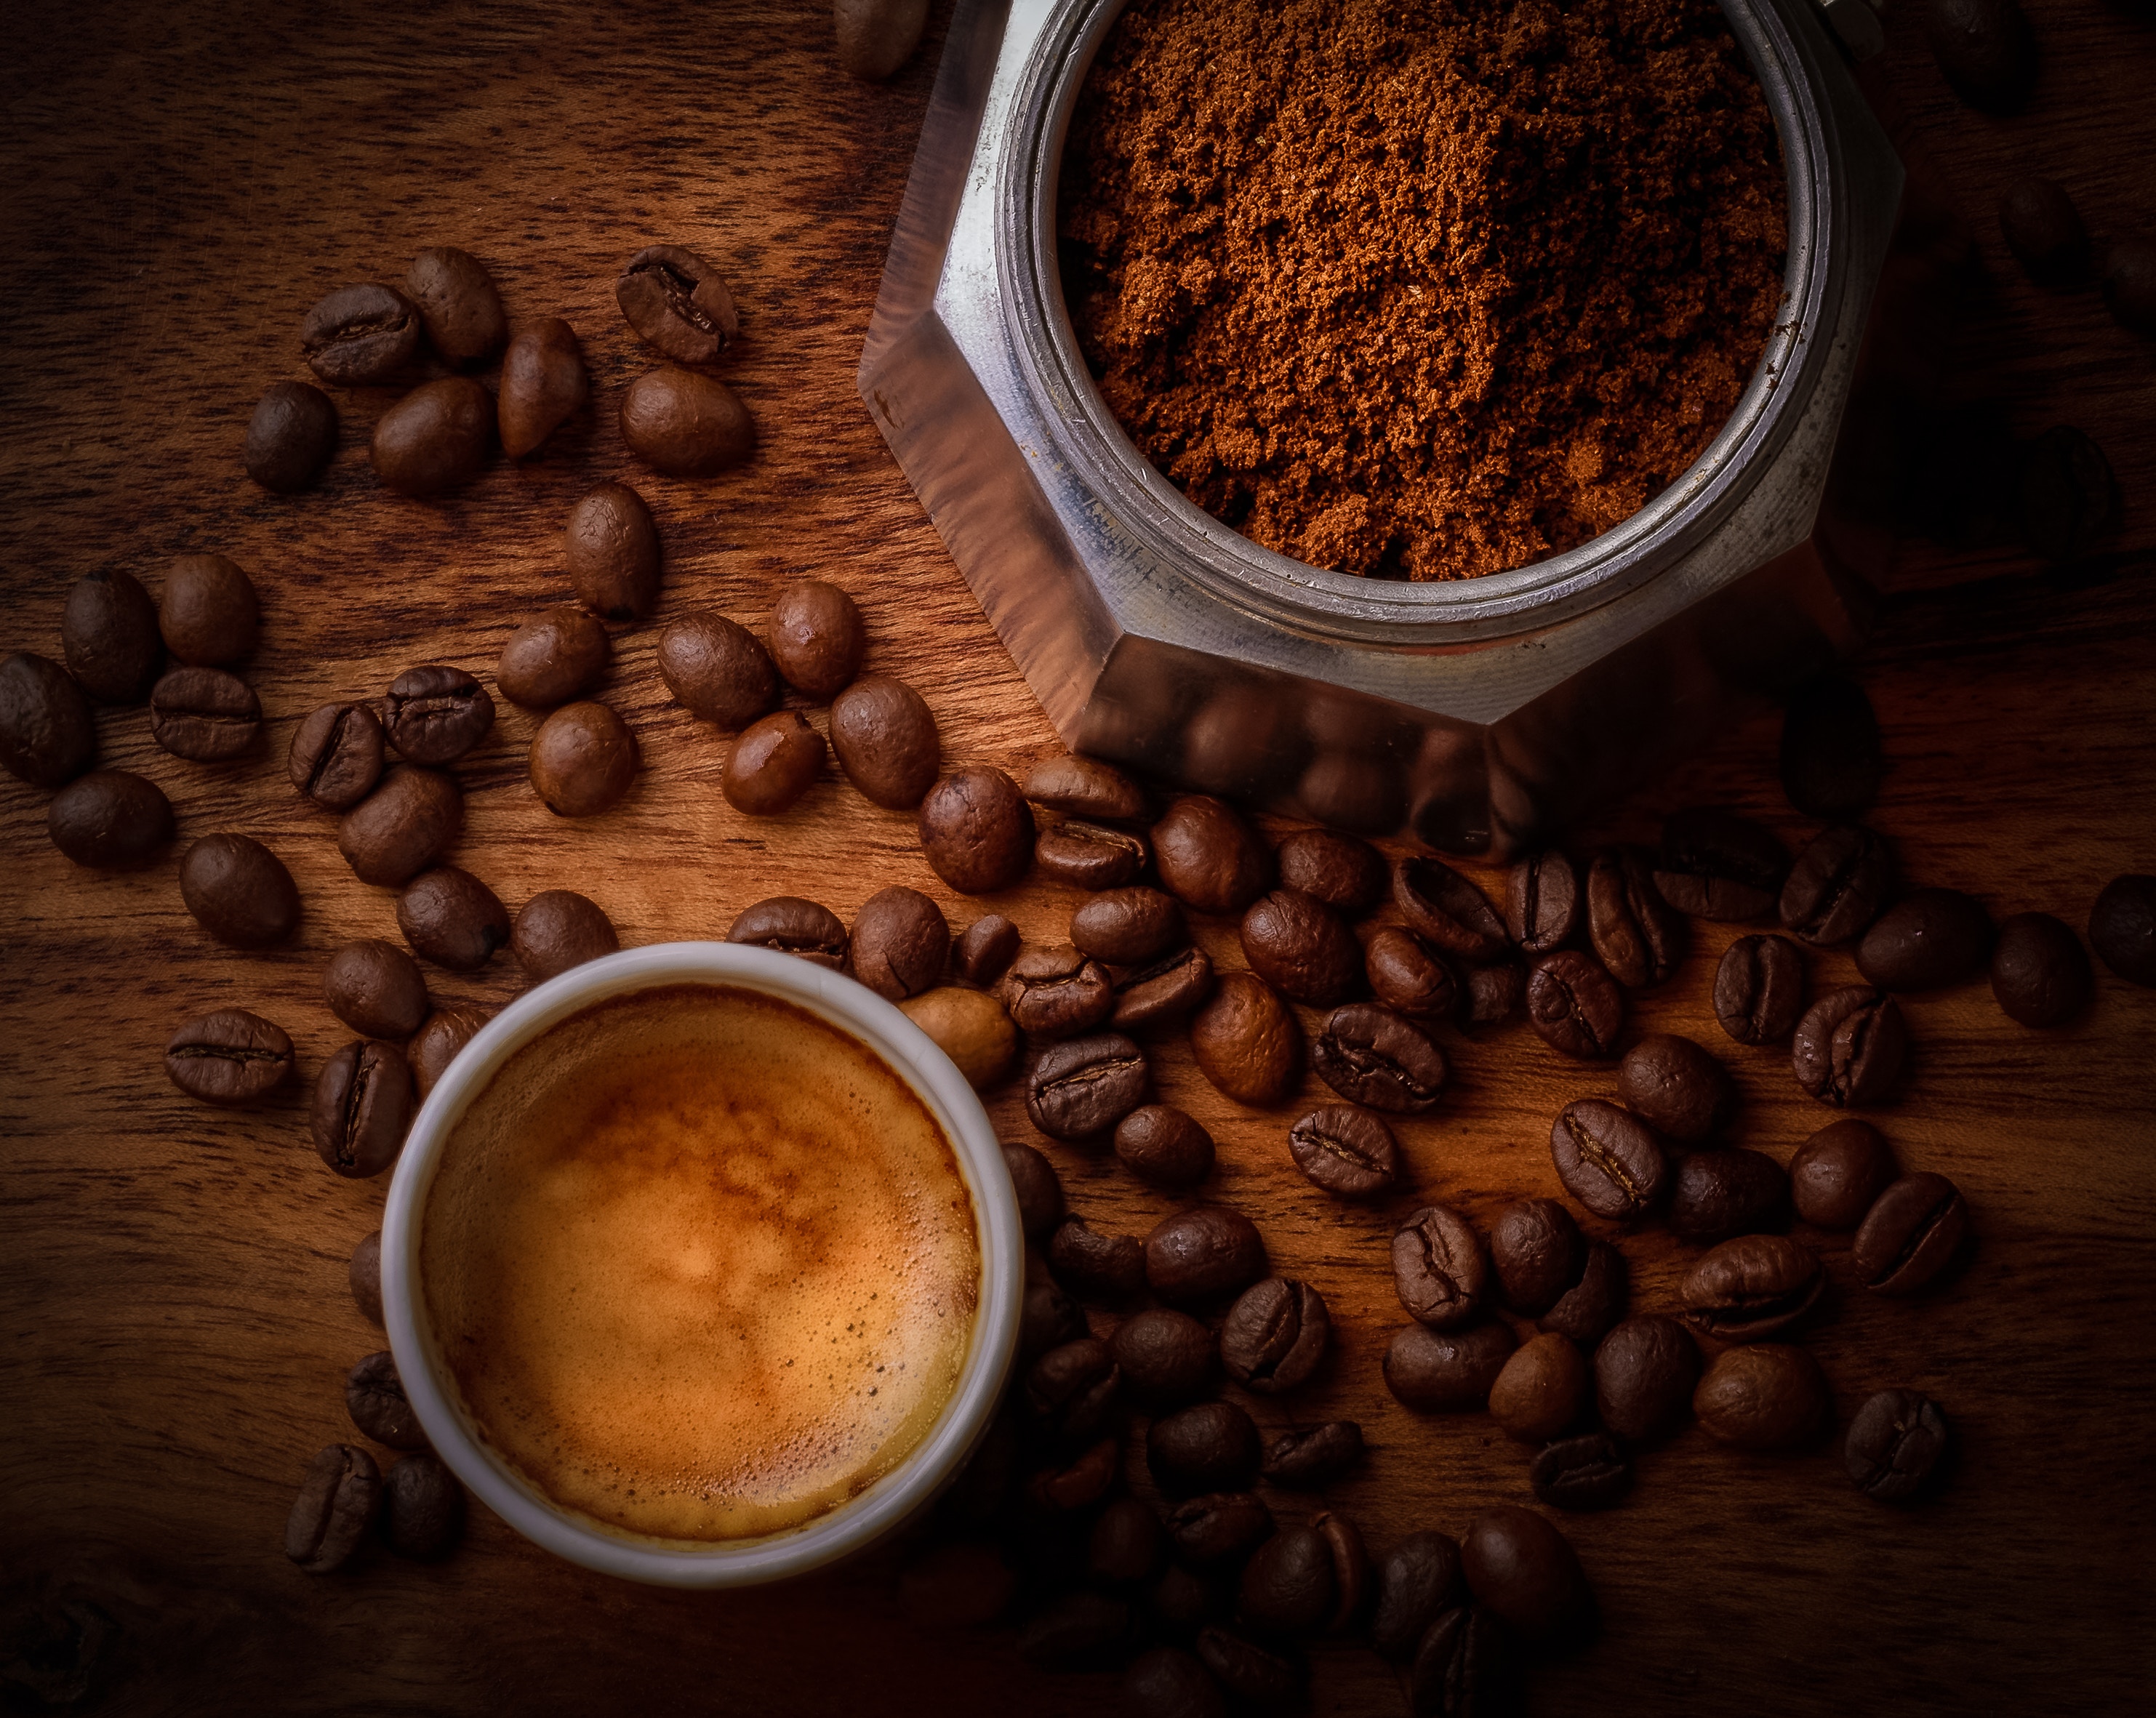 Coffee beans, ground coffee and brewed coffee